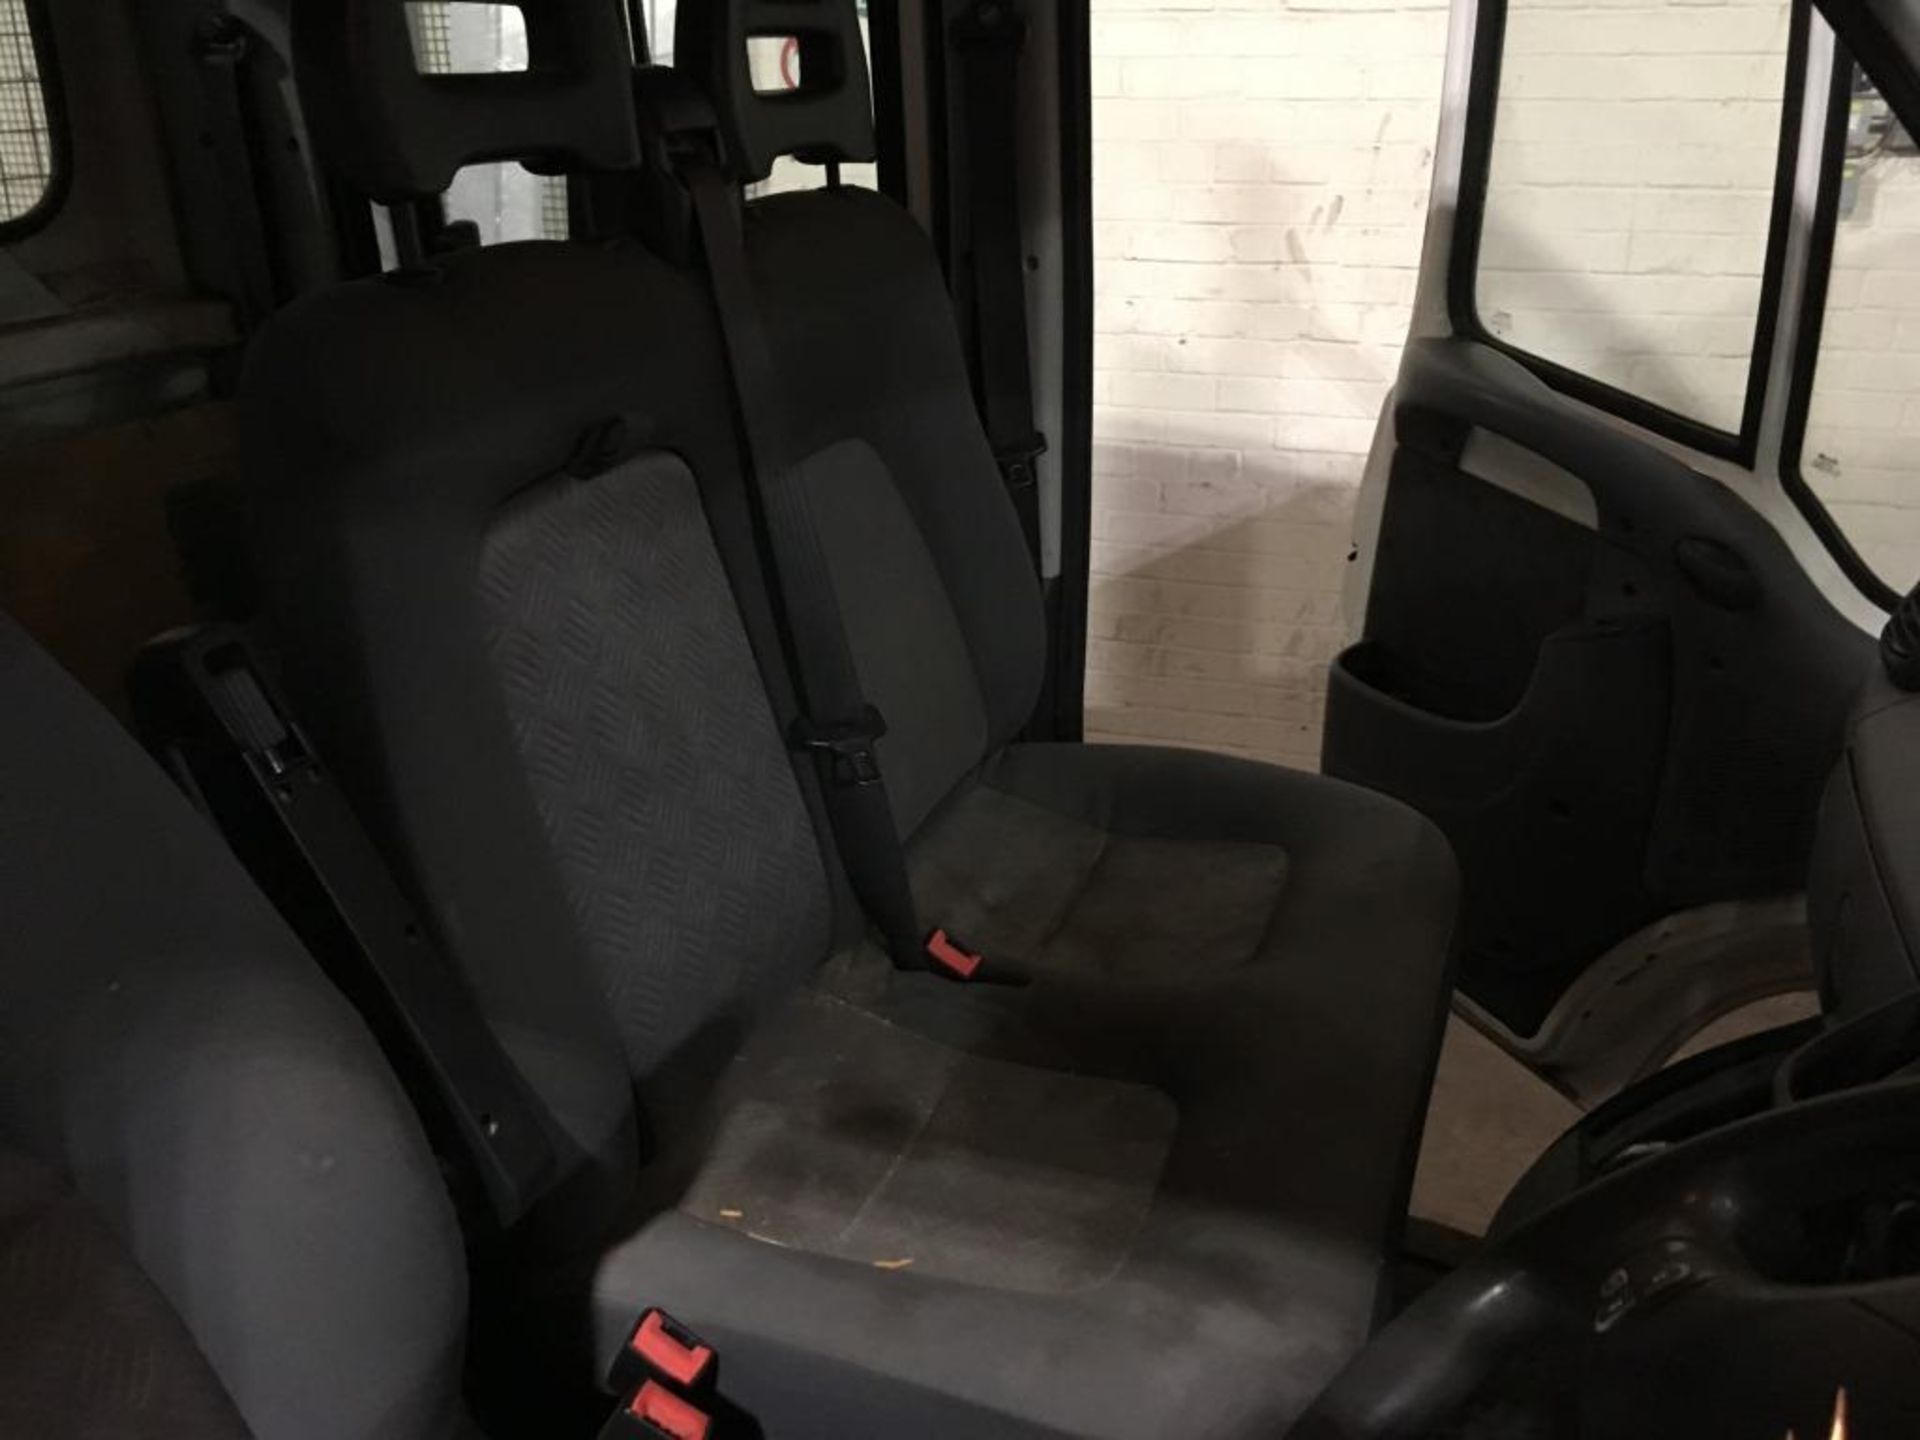 Citroen Relay 1800 TD HDI LWB double cab flat bed van, (rear seats removed) with swing lift V - Image 11 of 15